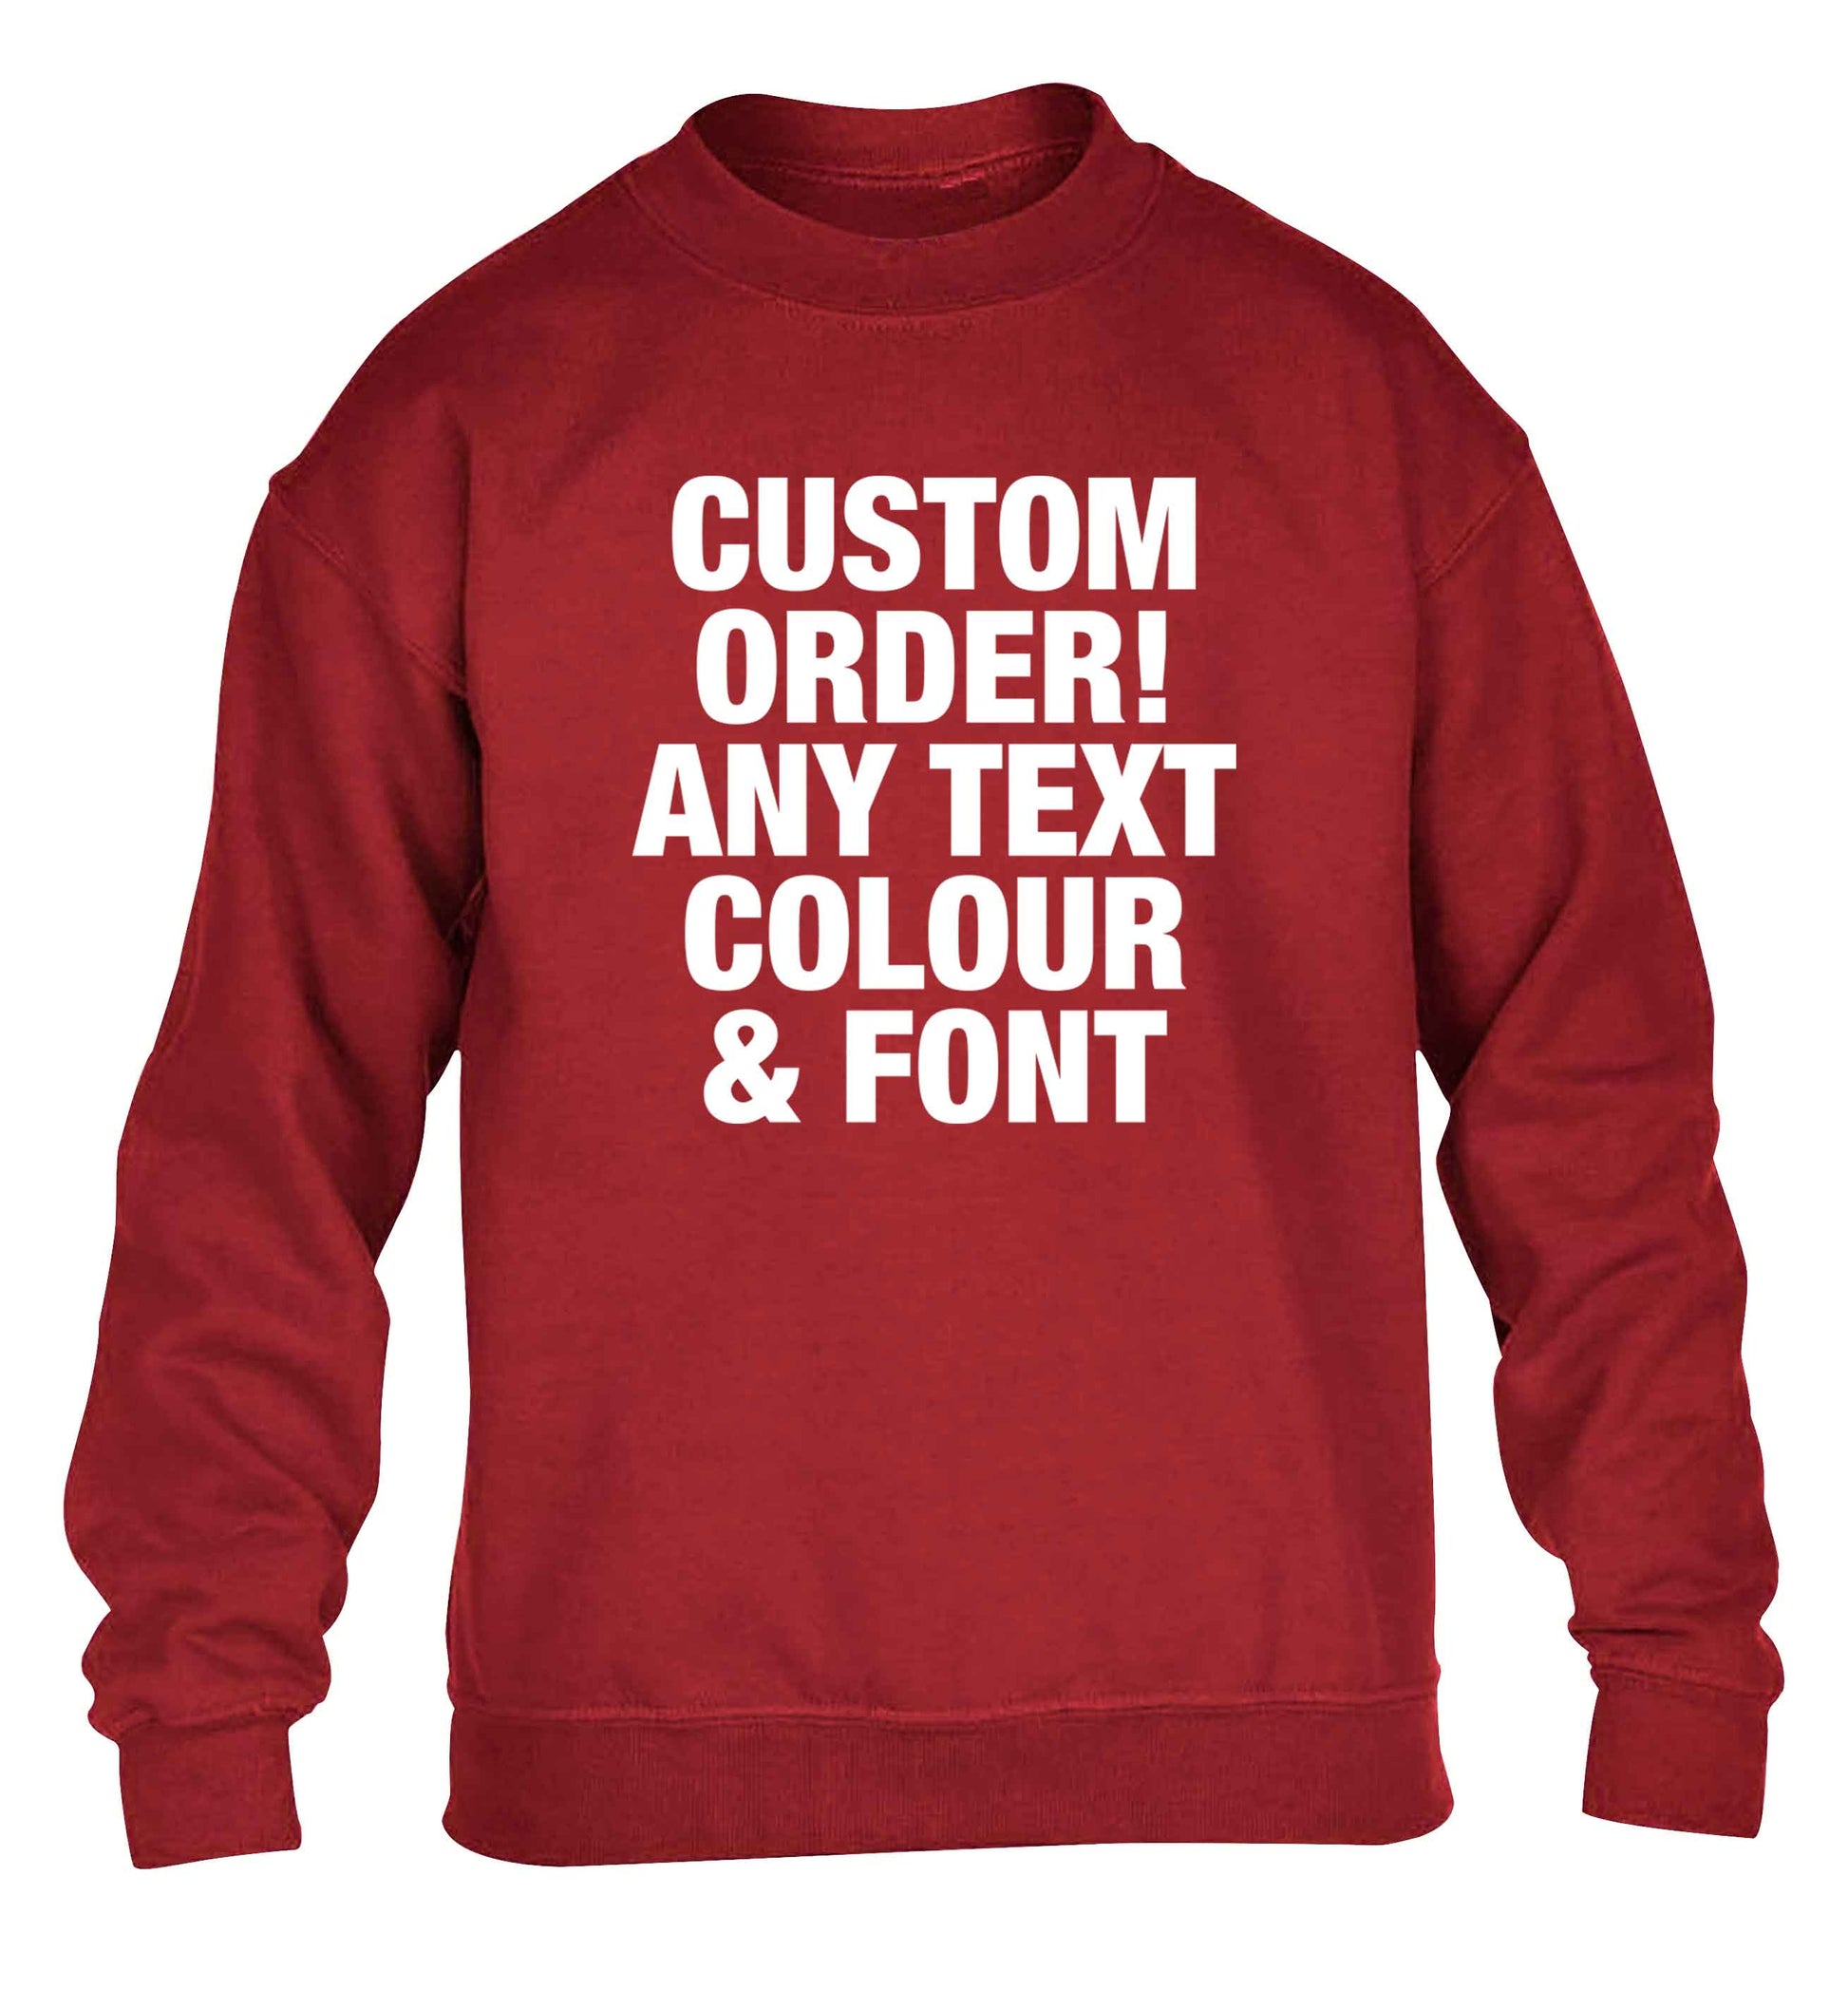 Custom order any text colour and font children's grey sweater 12-13 Years